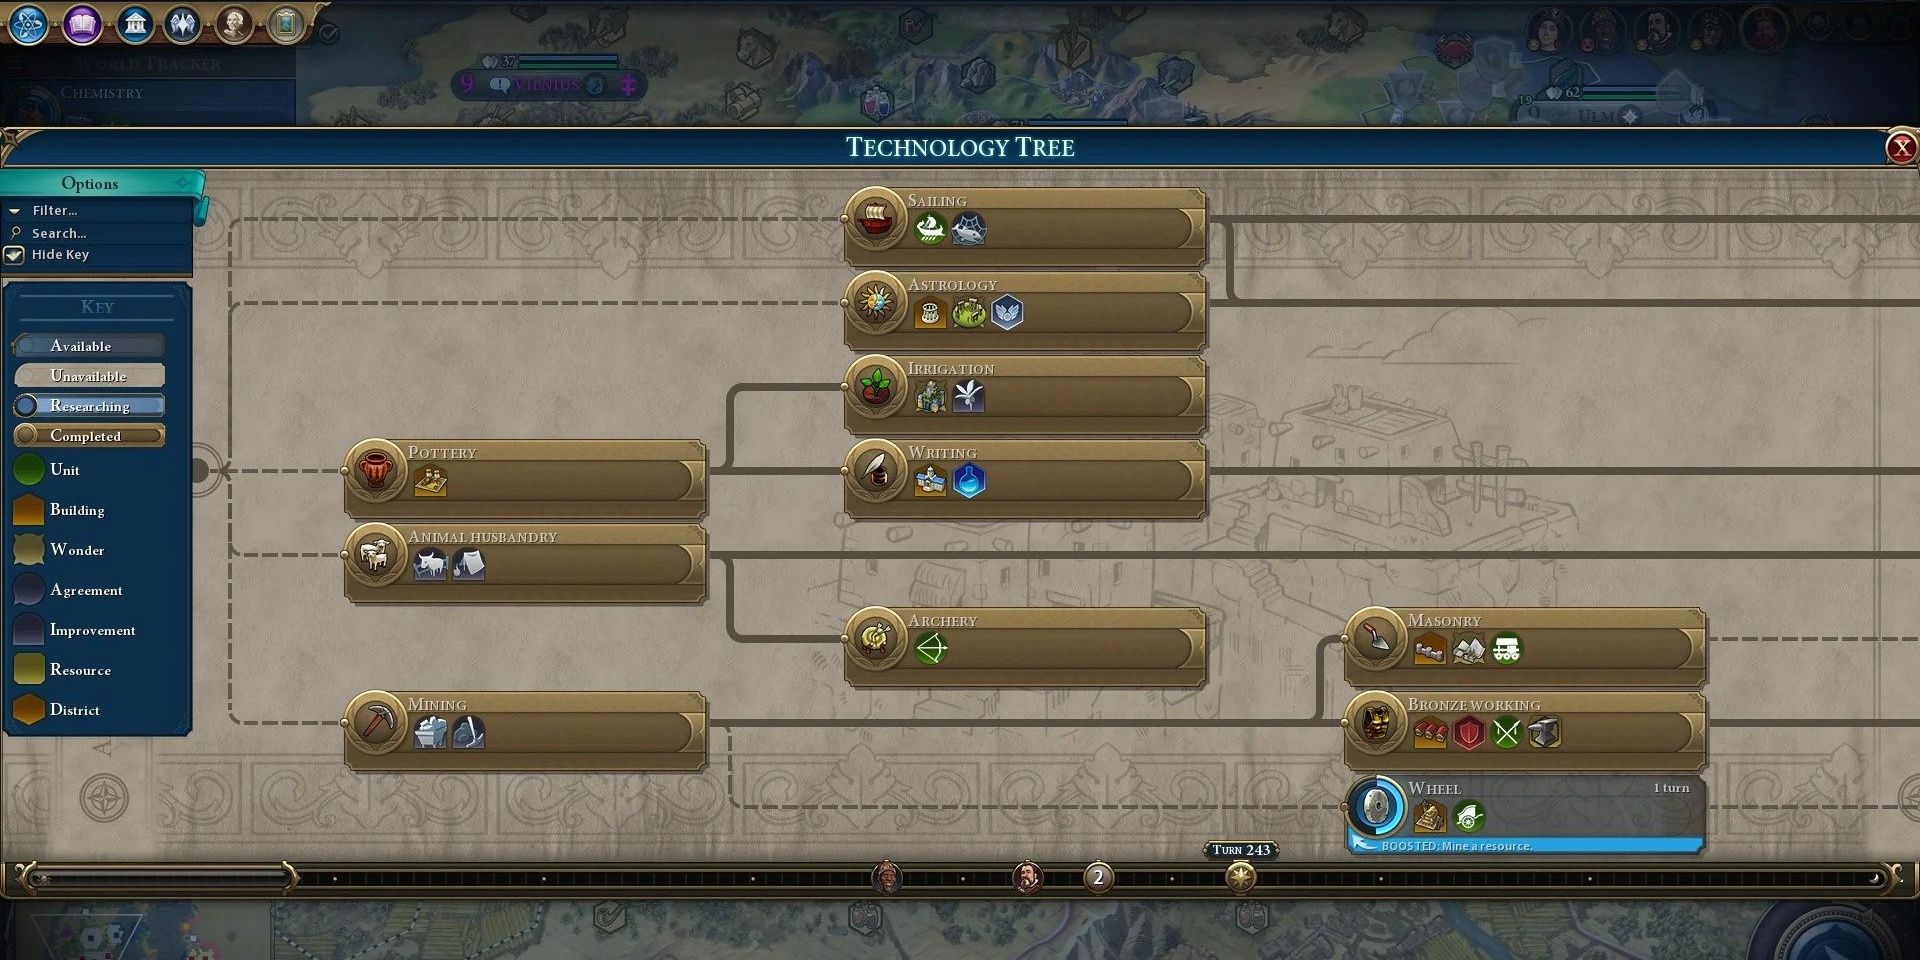 A view of the Civ 6 tech tree with some early technologies researched